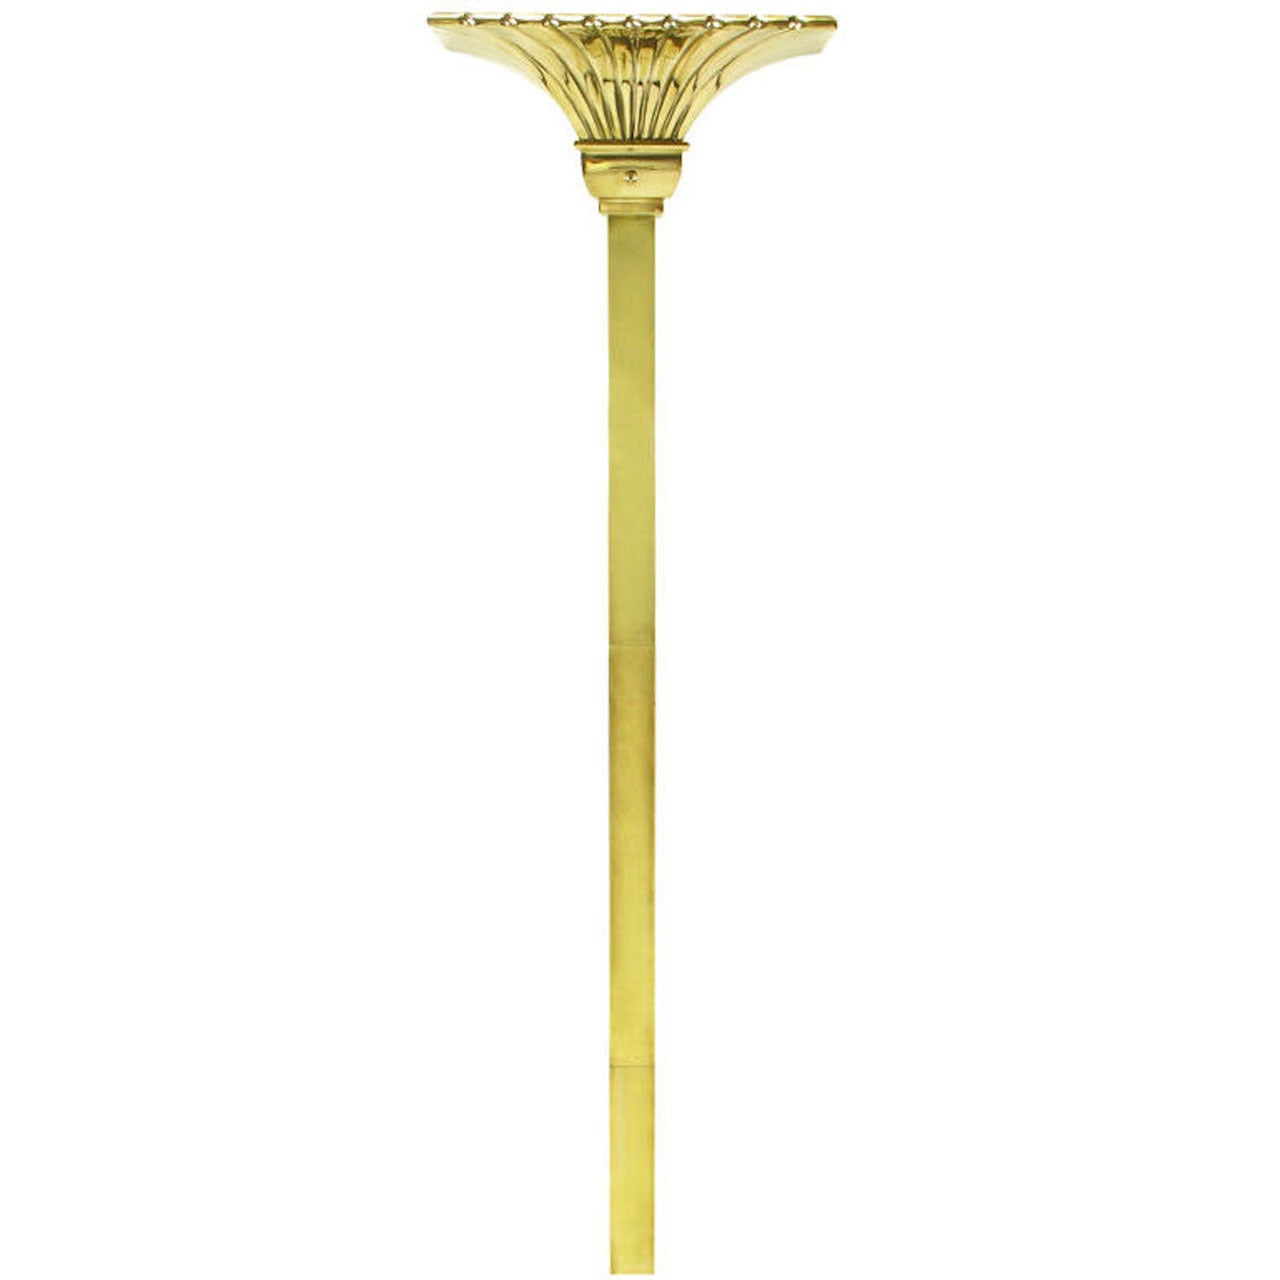 Chapman Lighting Brass Empire Style Wall-Mounted Torchiere